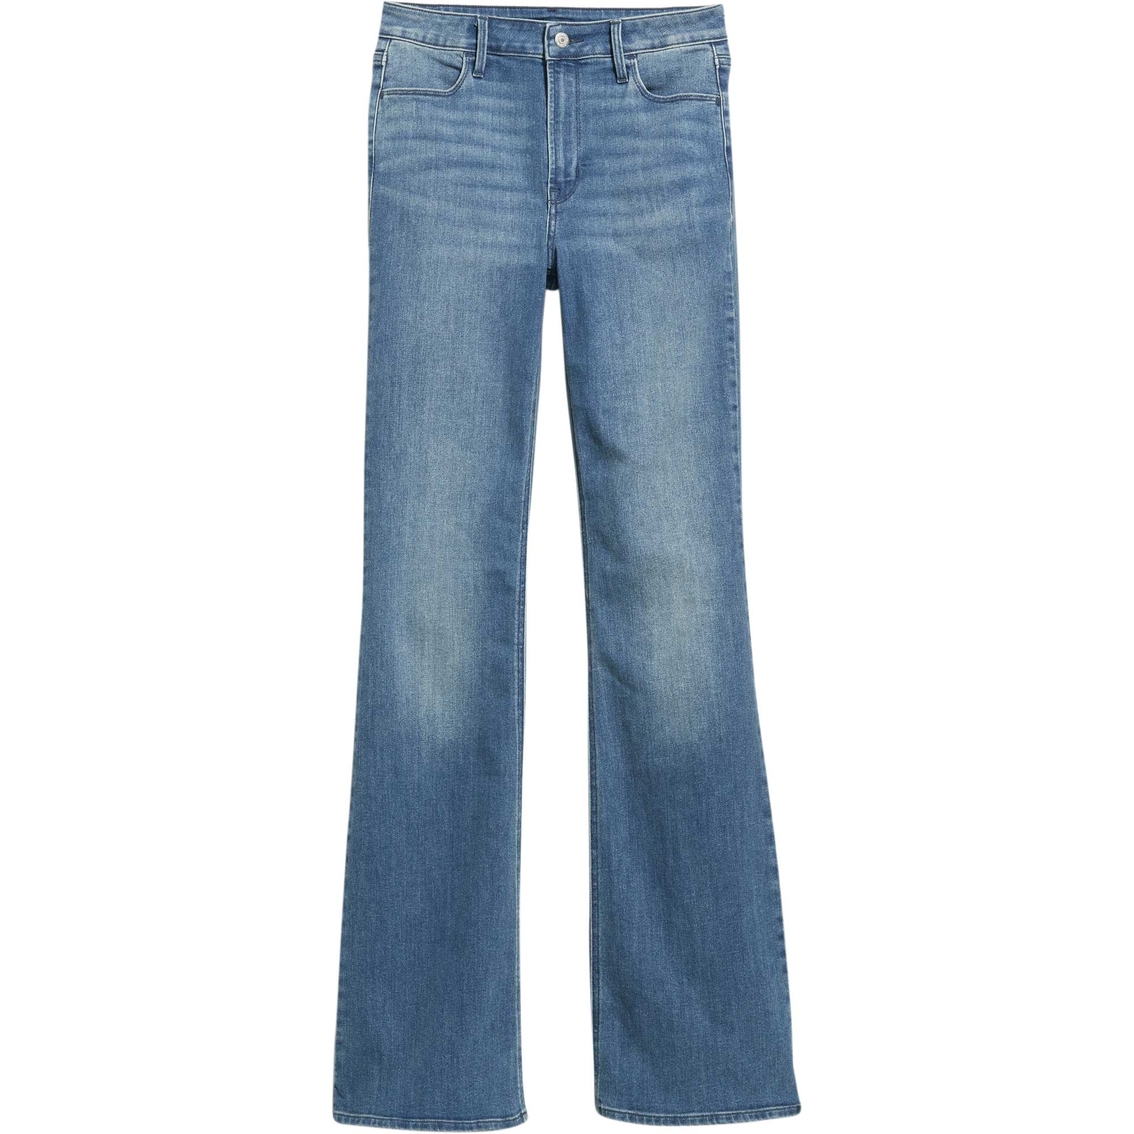 Old Navy Wow Flare Medium Wash Jeans | Jeans | Clothing & Accessories ...